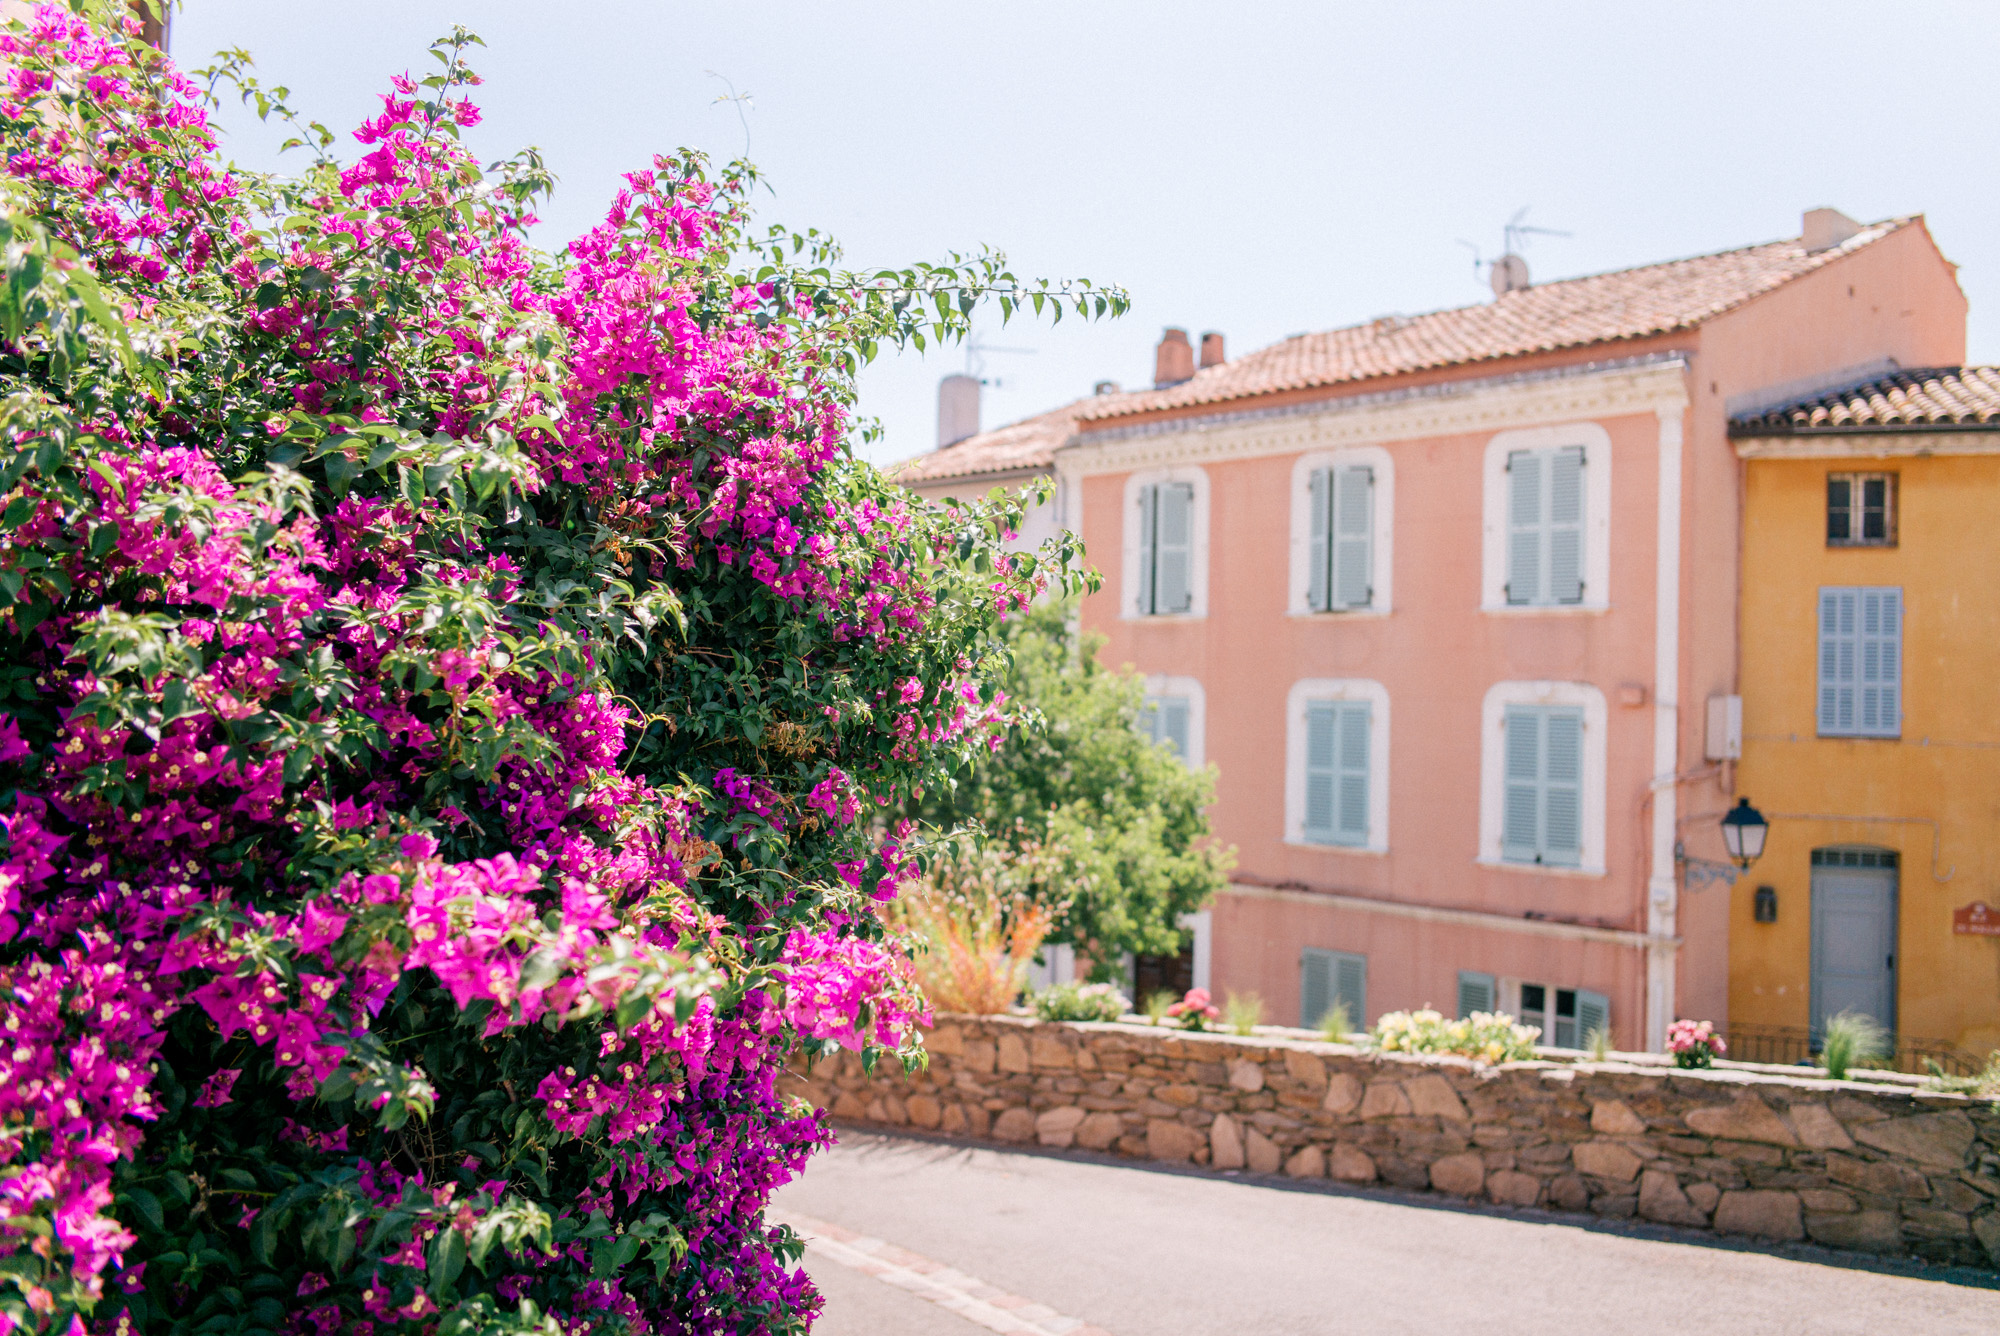 gmg-grimaud-france-1009850